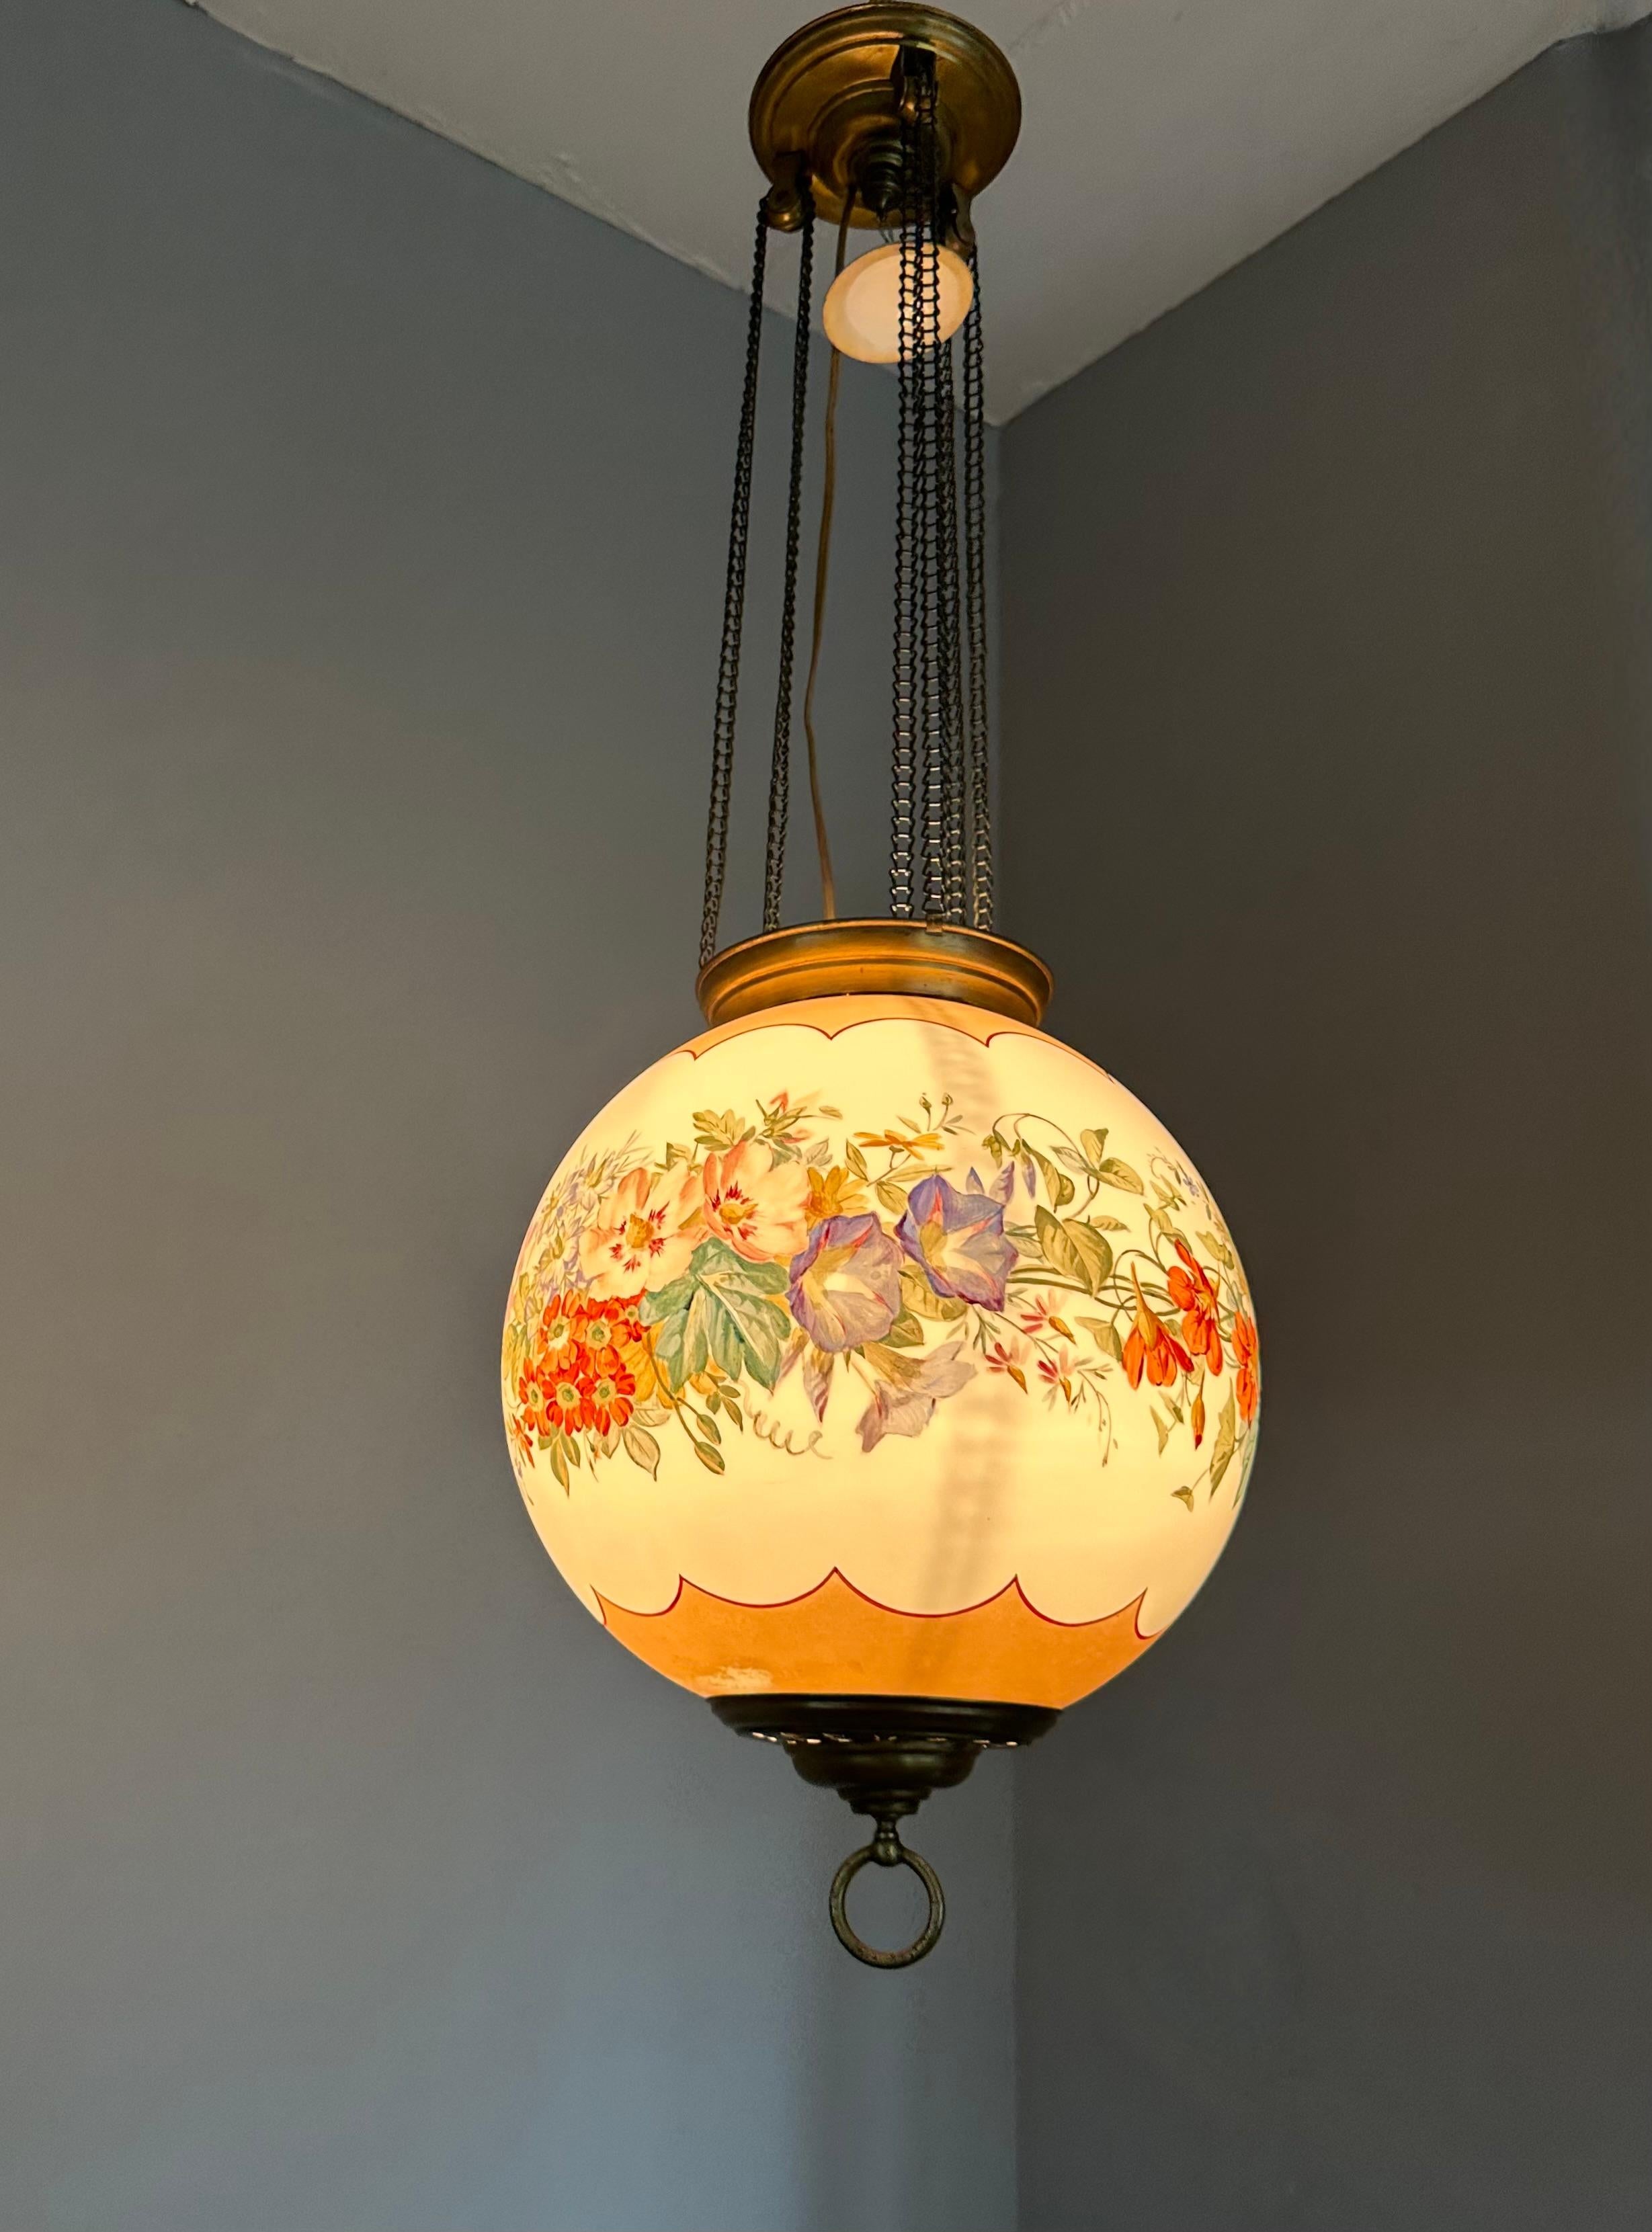 Antique Round Opaline Glass Shade Pendant Light with Wreath of Flowers Decor For Sale 11